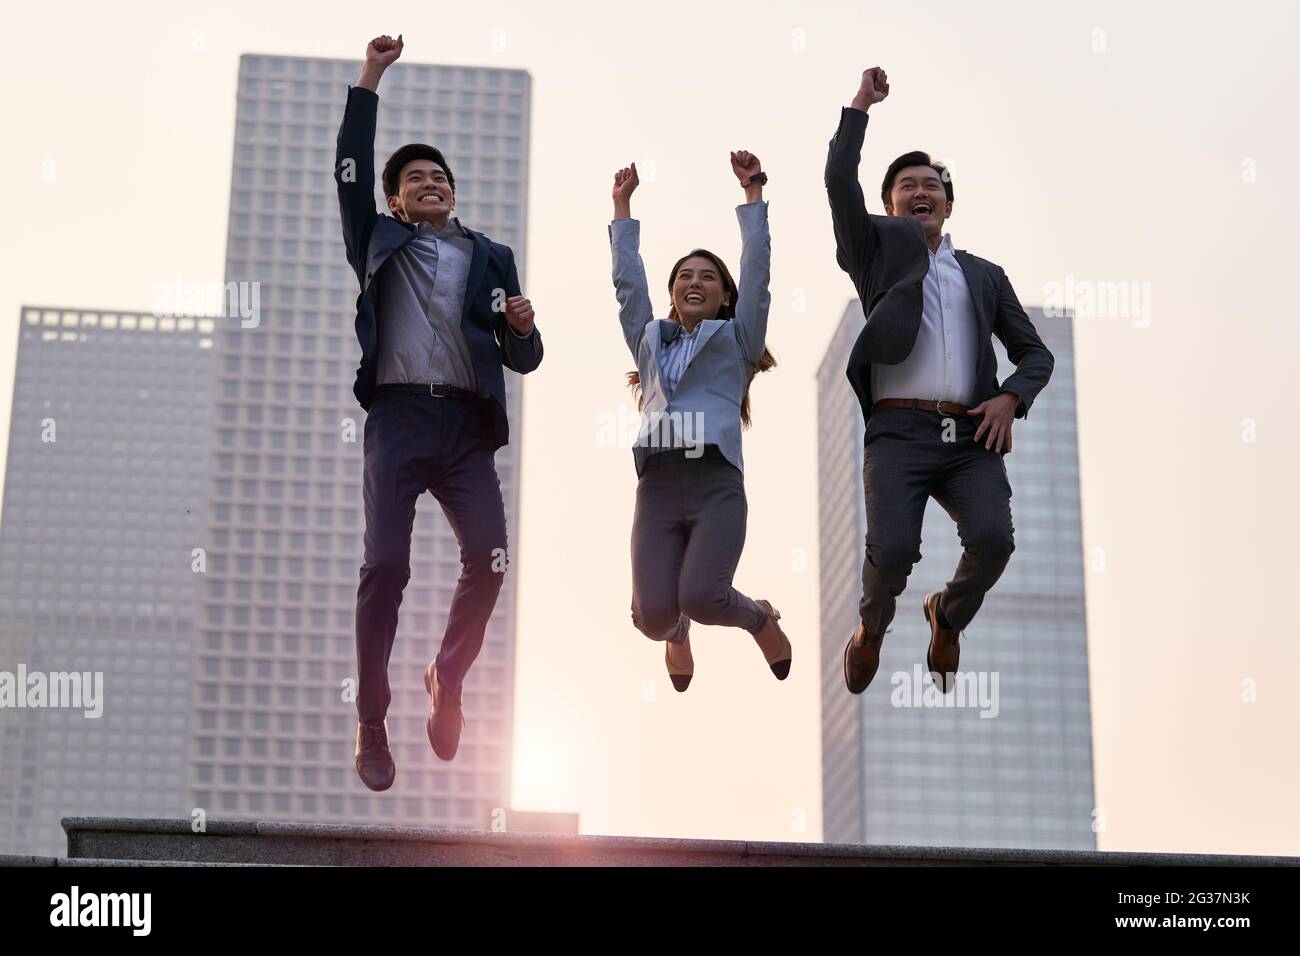 team of three asian corporate executives jumping celebrating success and achievement with city background Stock Photo